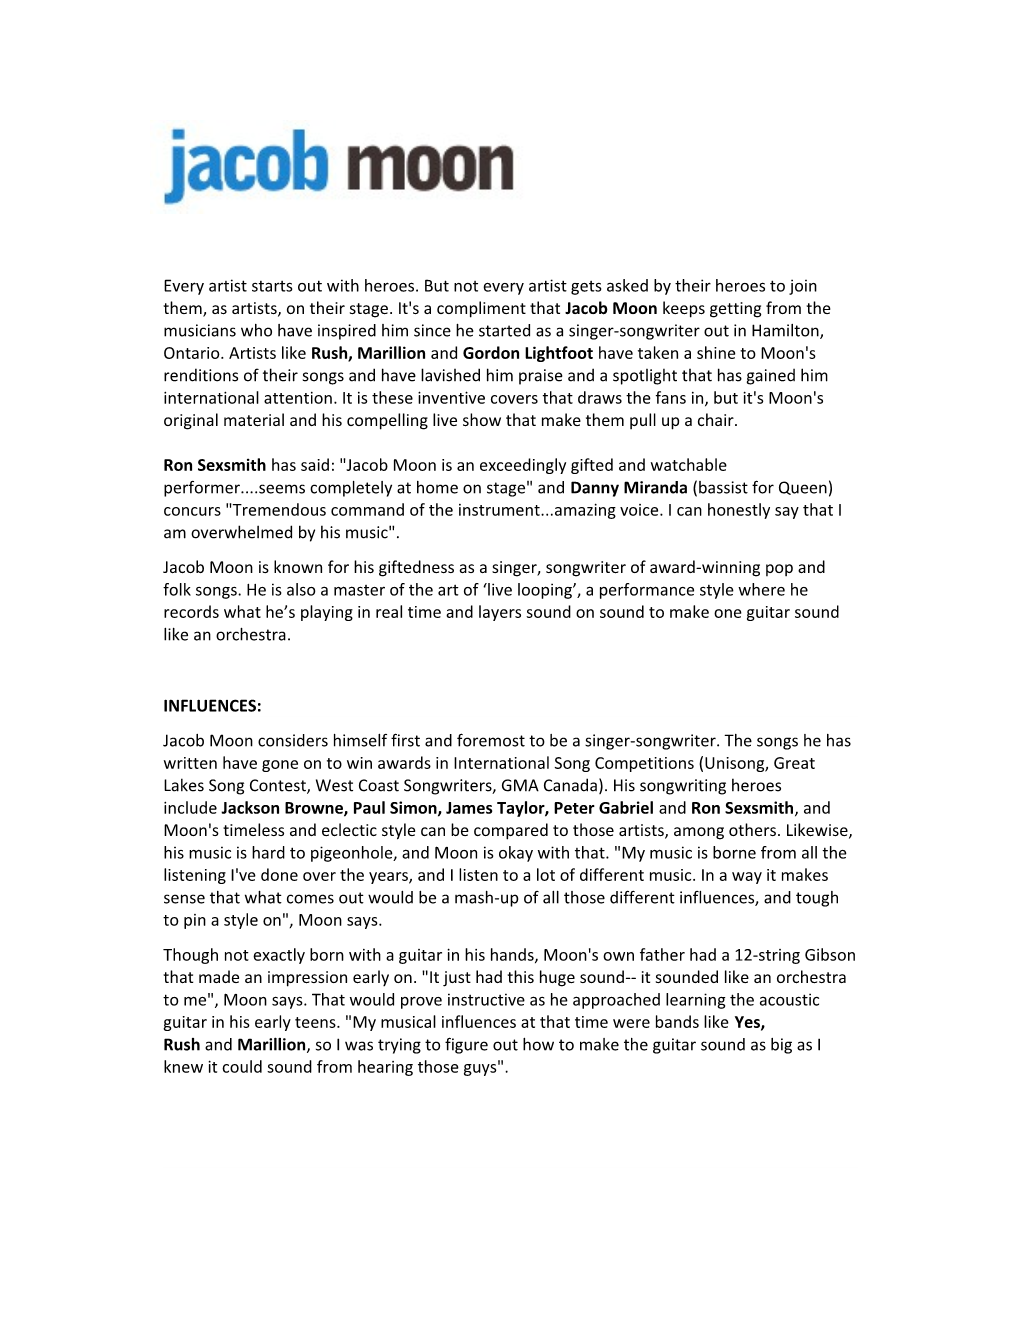 Jacob Moon Is Known for His Giftedness As a Singer, Songwriter of Award-Winning Pop And